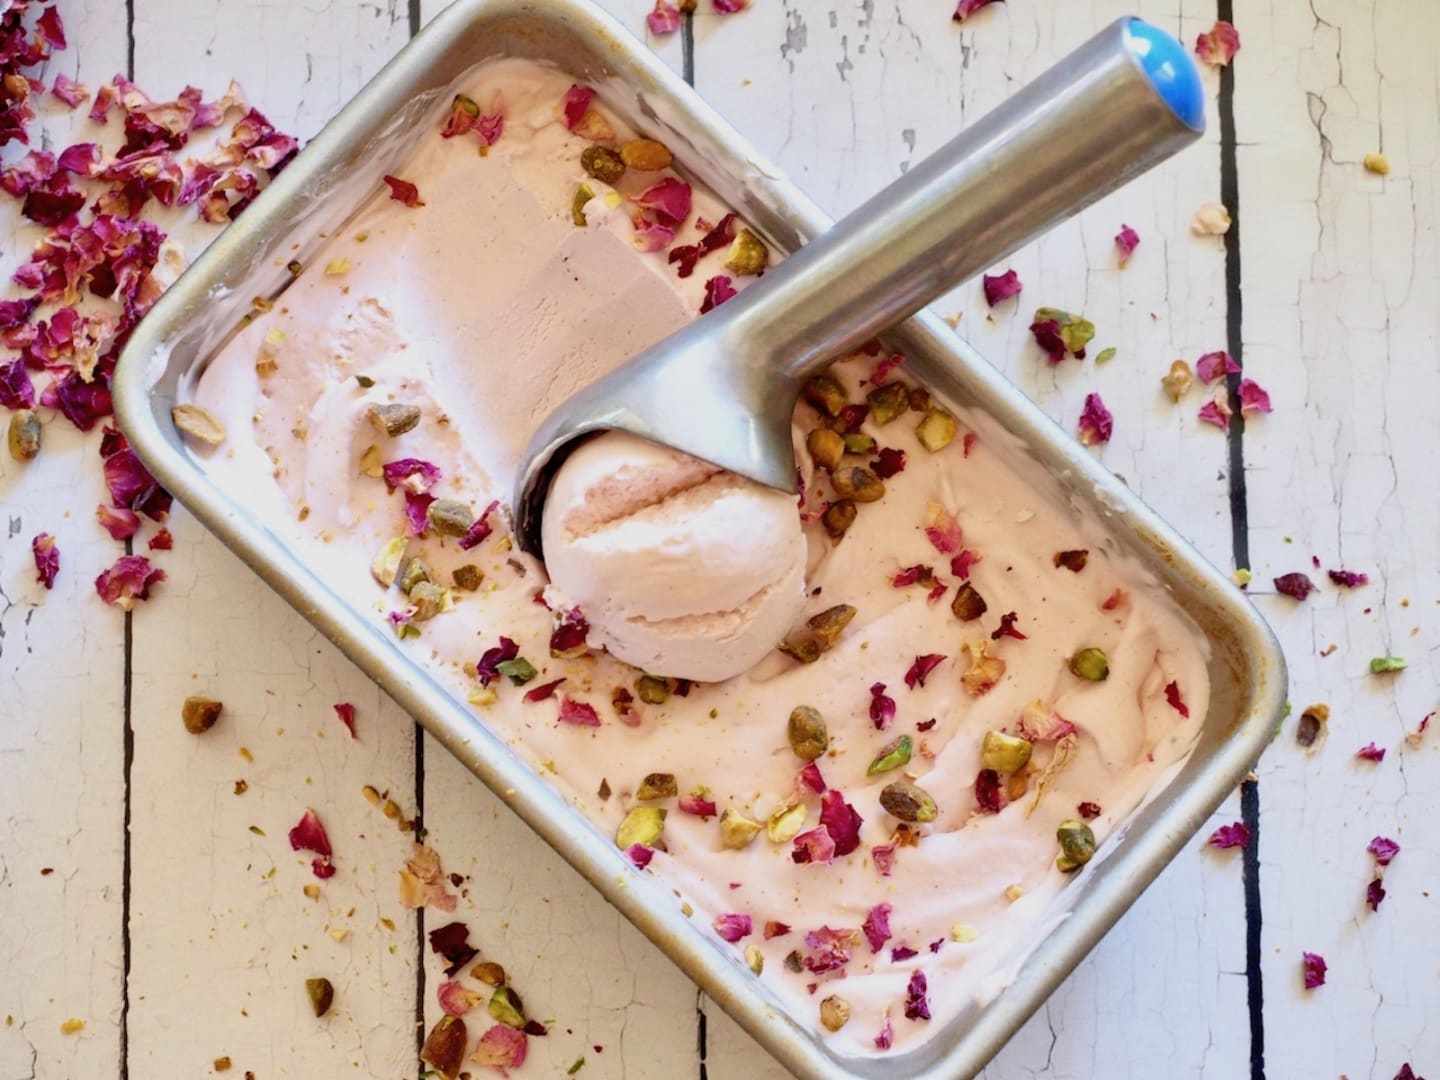 Ice cream toppings gone wild: Try rose petals and hibiscus